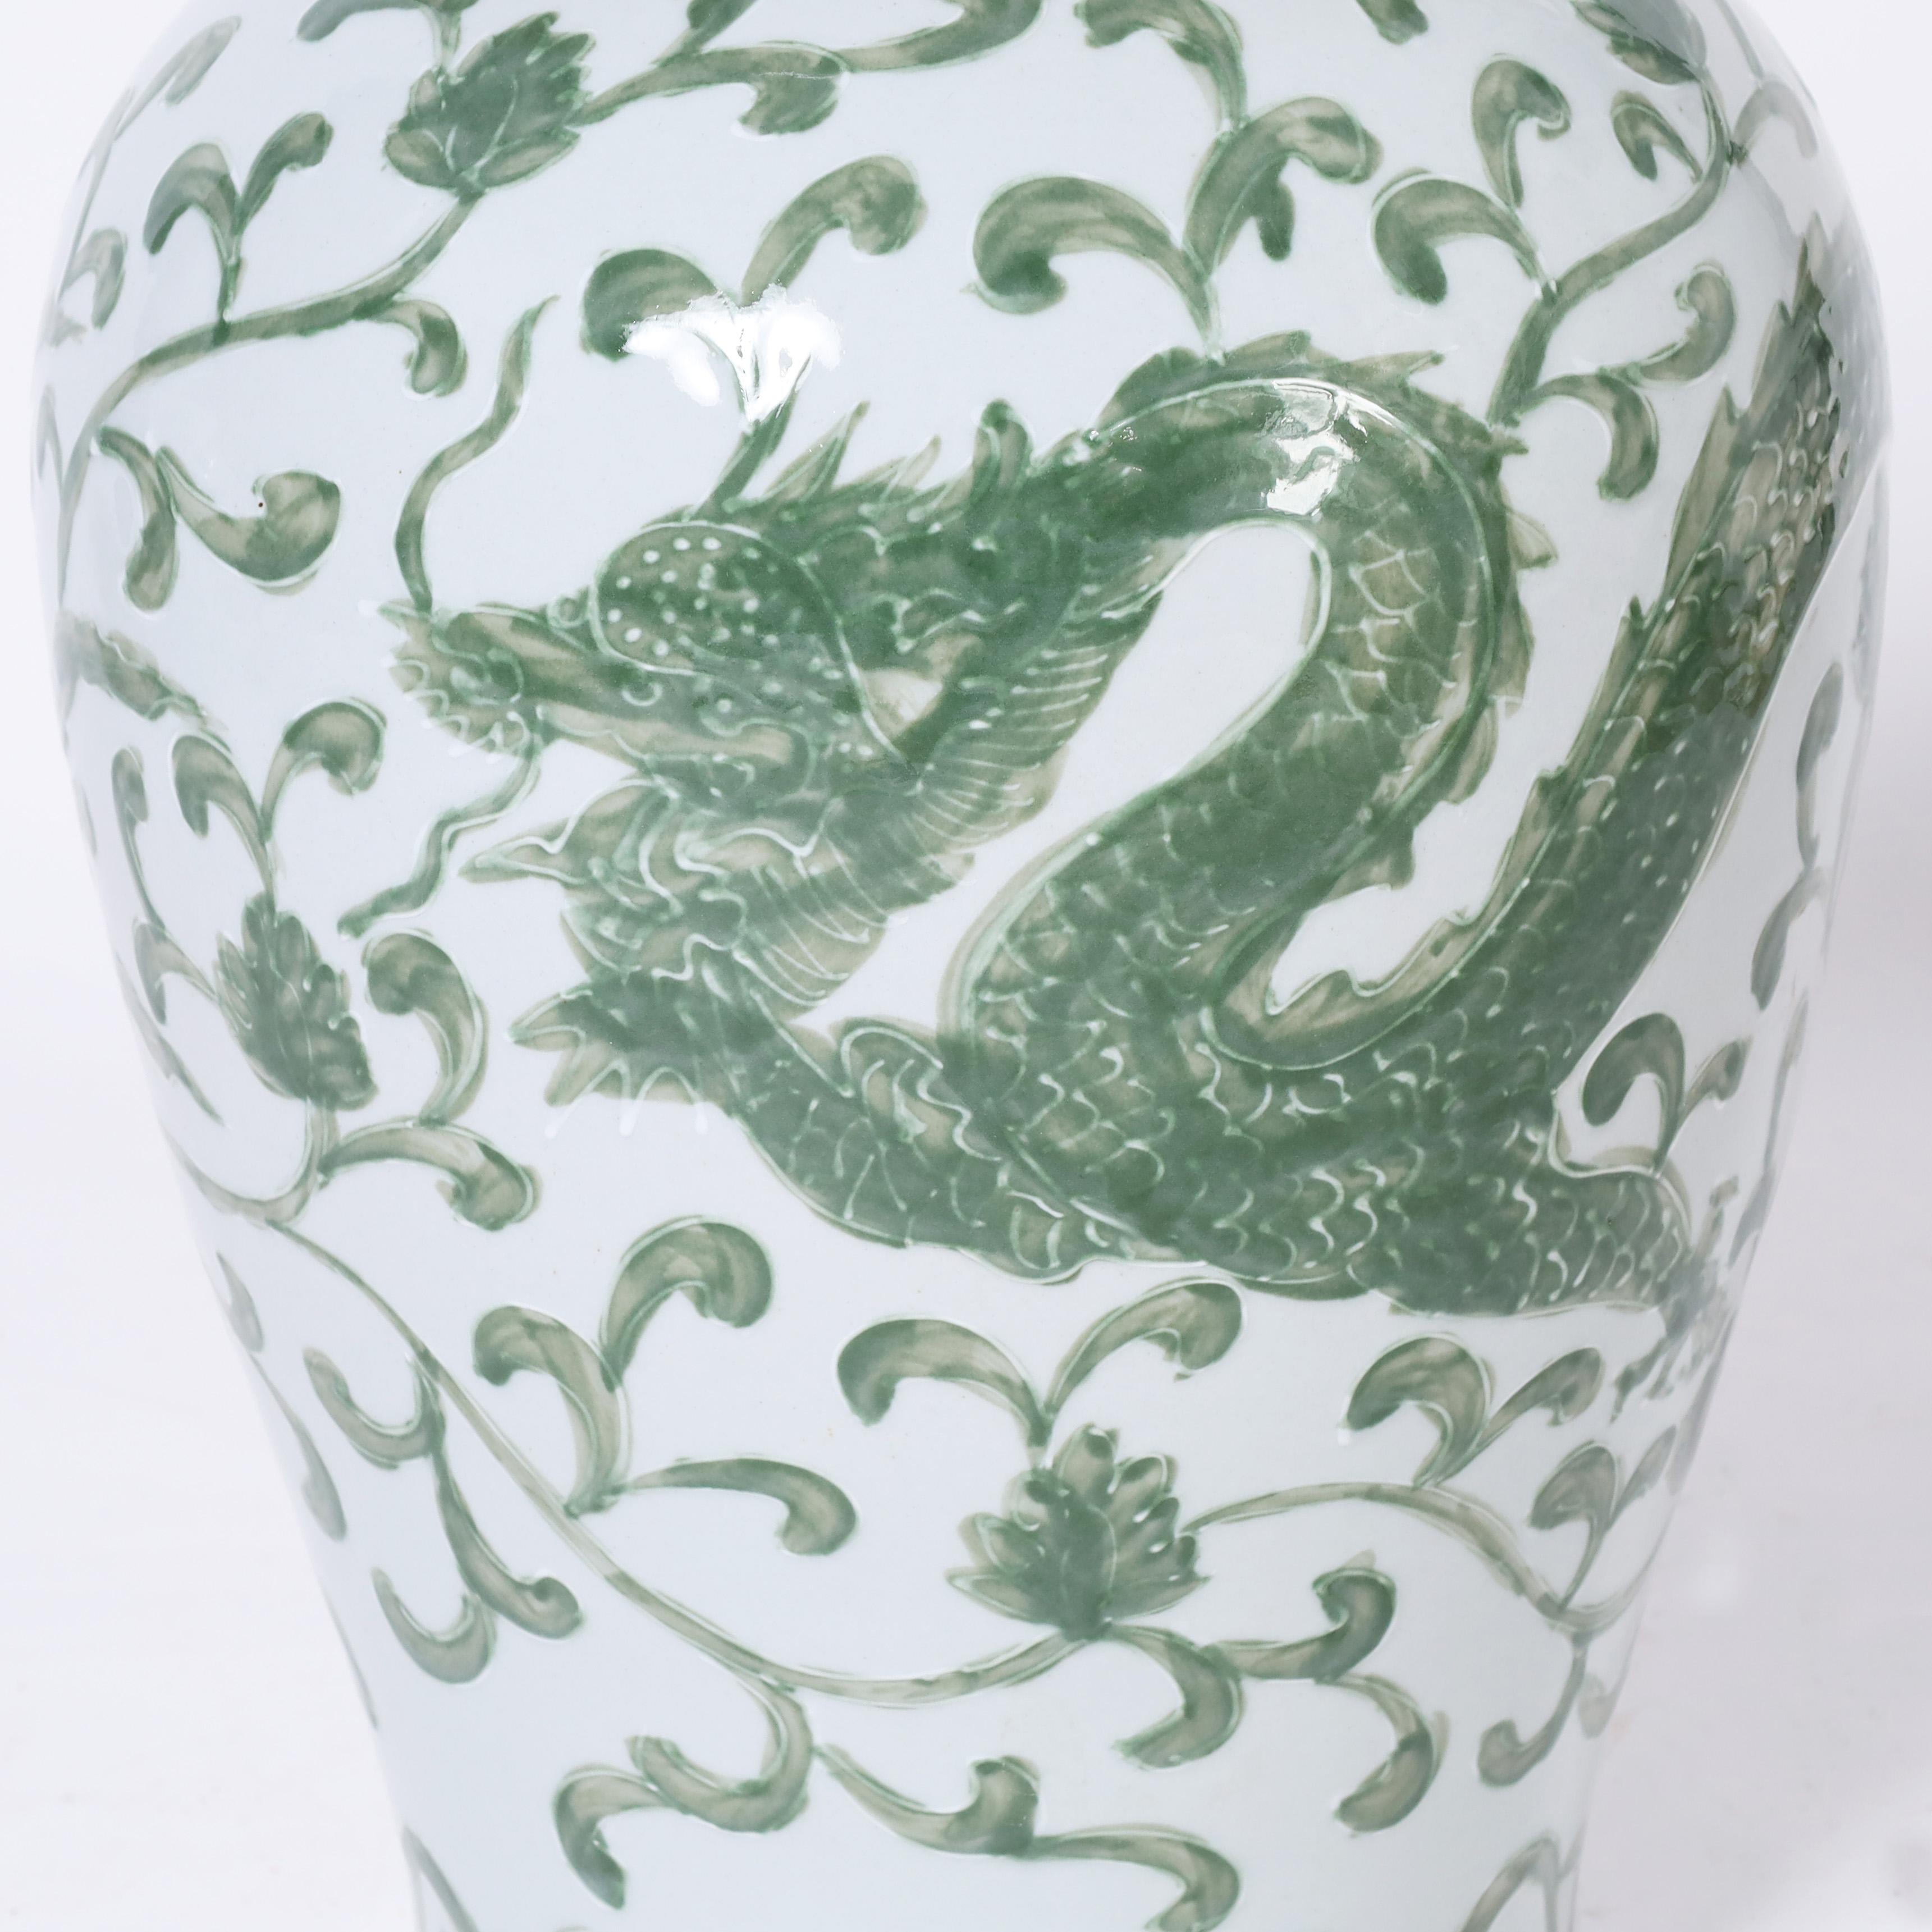 Pair of Large Chinese Export Green and White Porcelain Lidded Jars 1